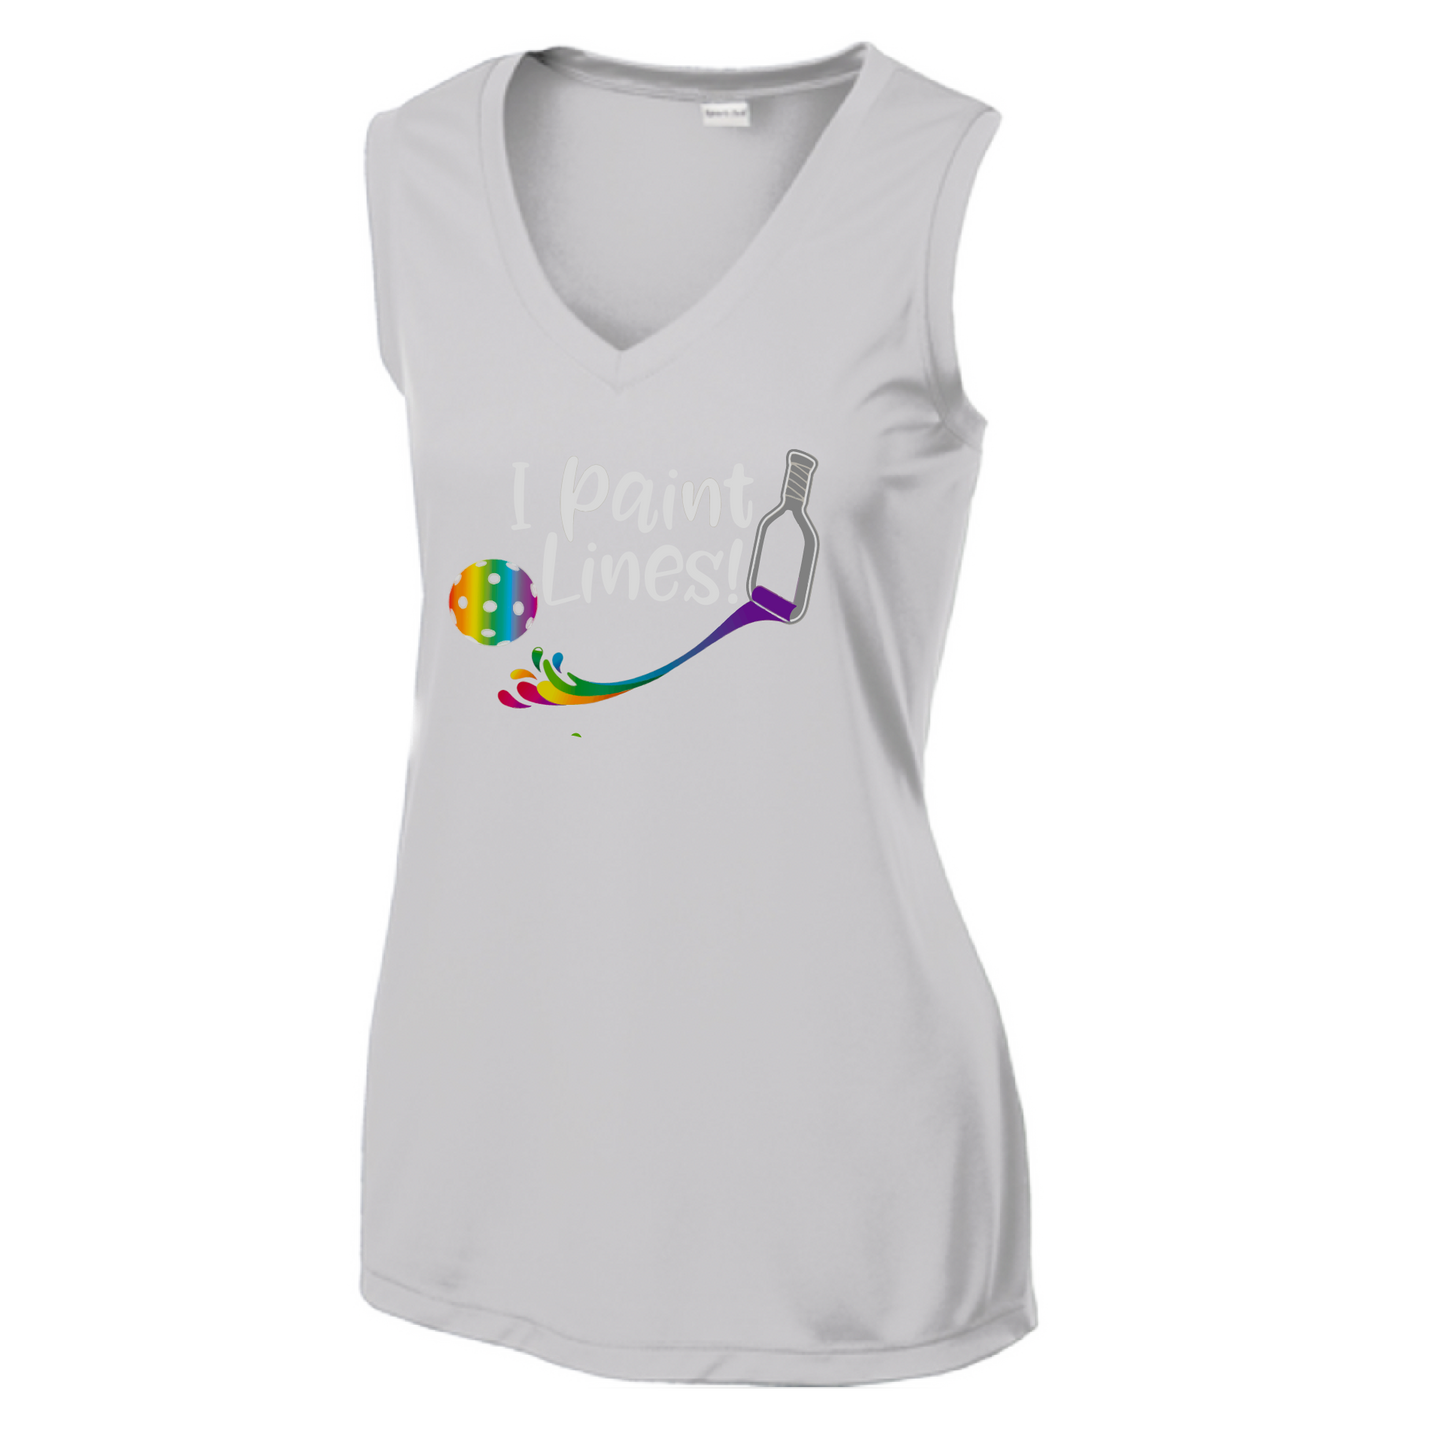 Pickleball Design: I Paint Lines  Women's Style: Sleeveless Tank V-Neck  Turn up the volume in this Women's shirt with its perfect mix of softness and attitude. Material is ultra-comfortable with moisture wicking properties and tri-blend softness. PosiCharge technology locks in color. Highly breathable and lightweight.